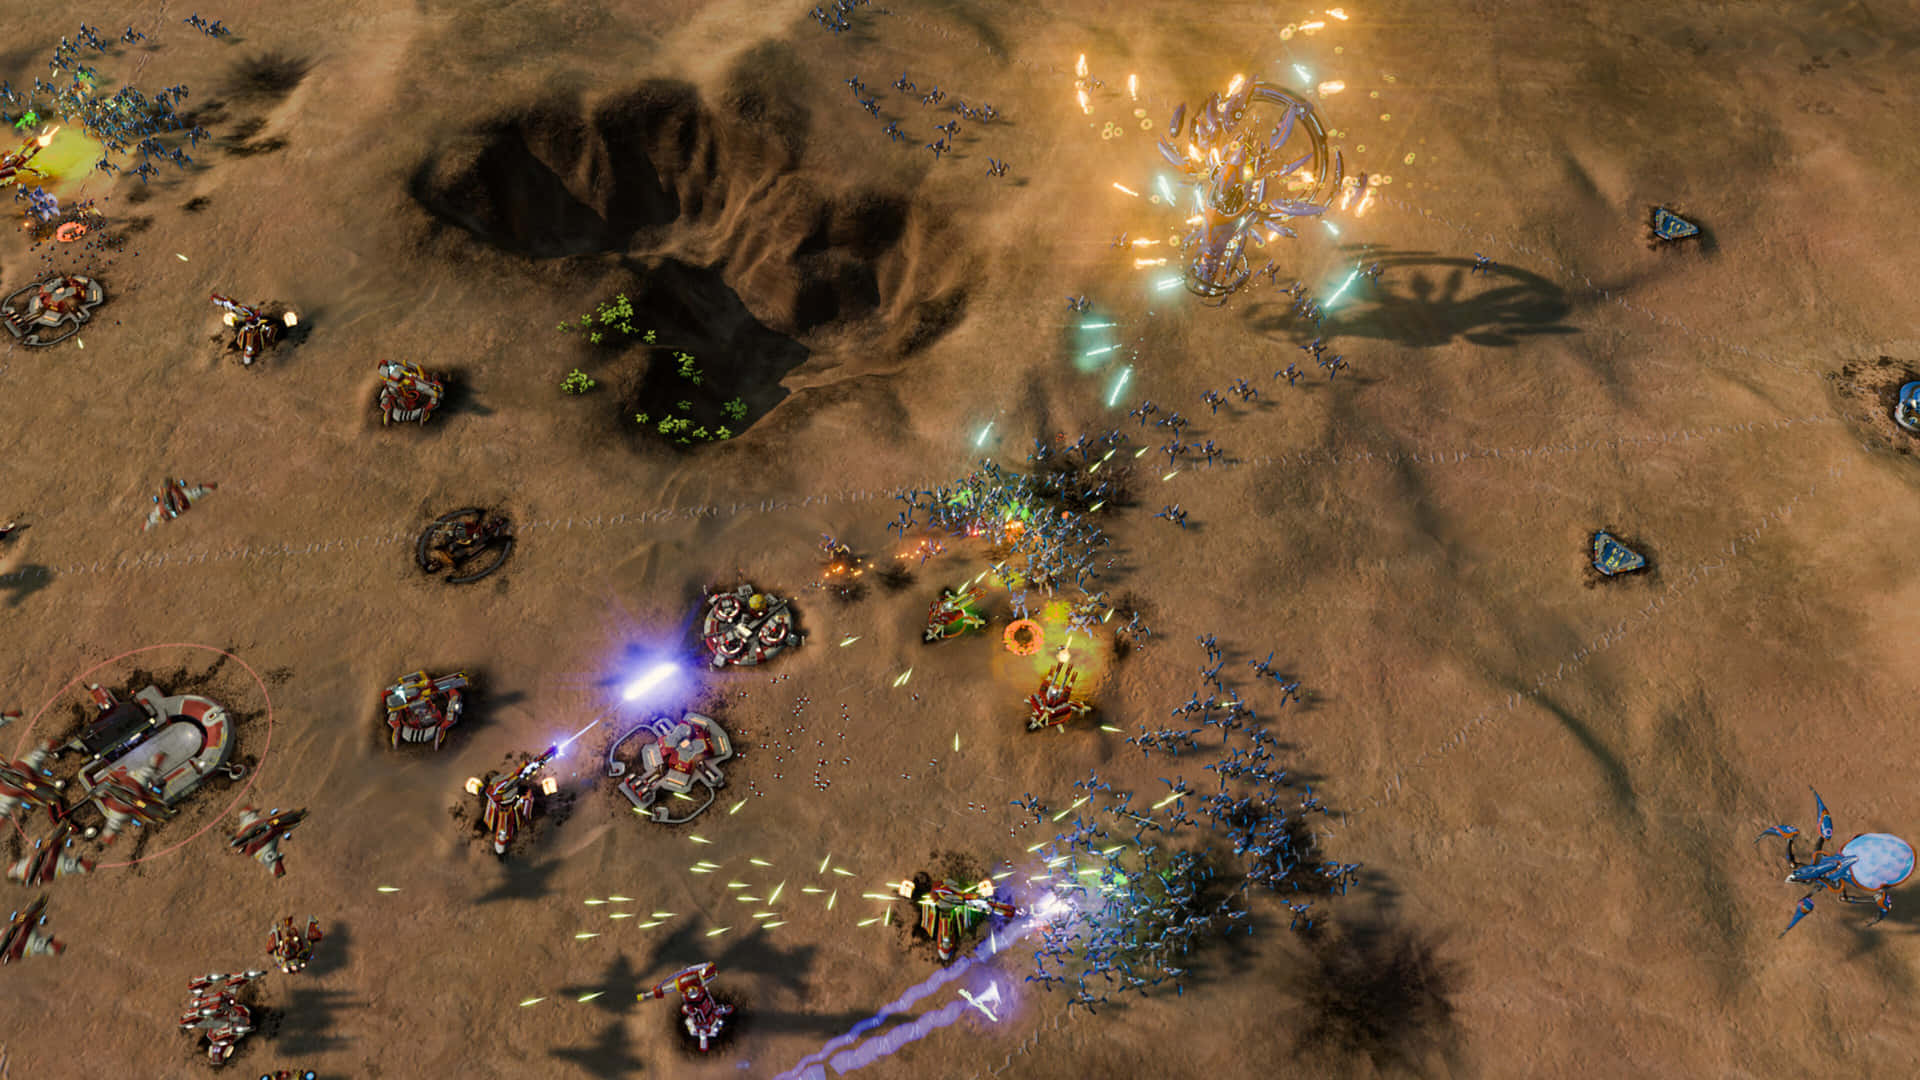 Experience epic sci-fi battles in Ashes of the Singularity Escalation